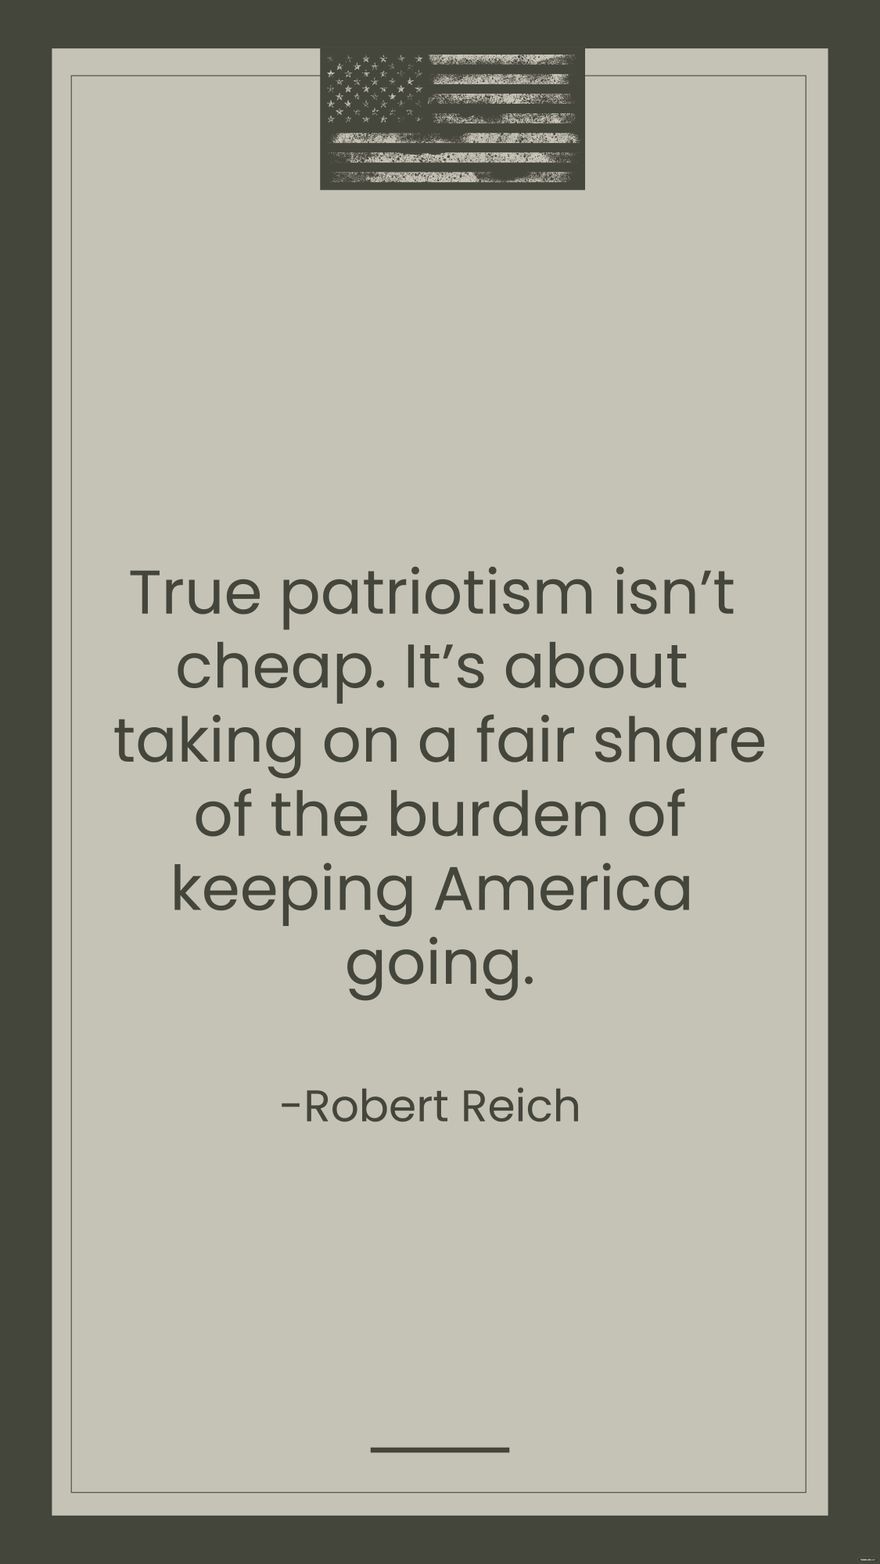 Robert Reich - True patriotism isn't cheap. It's about taking on a fair share of the burden of keeping America going. in JPG